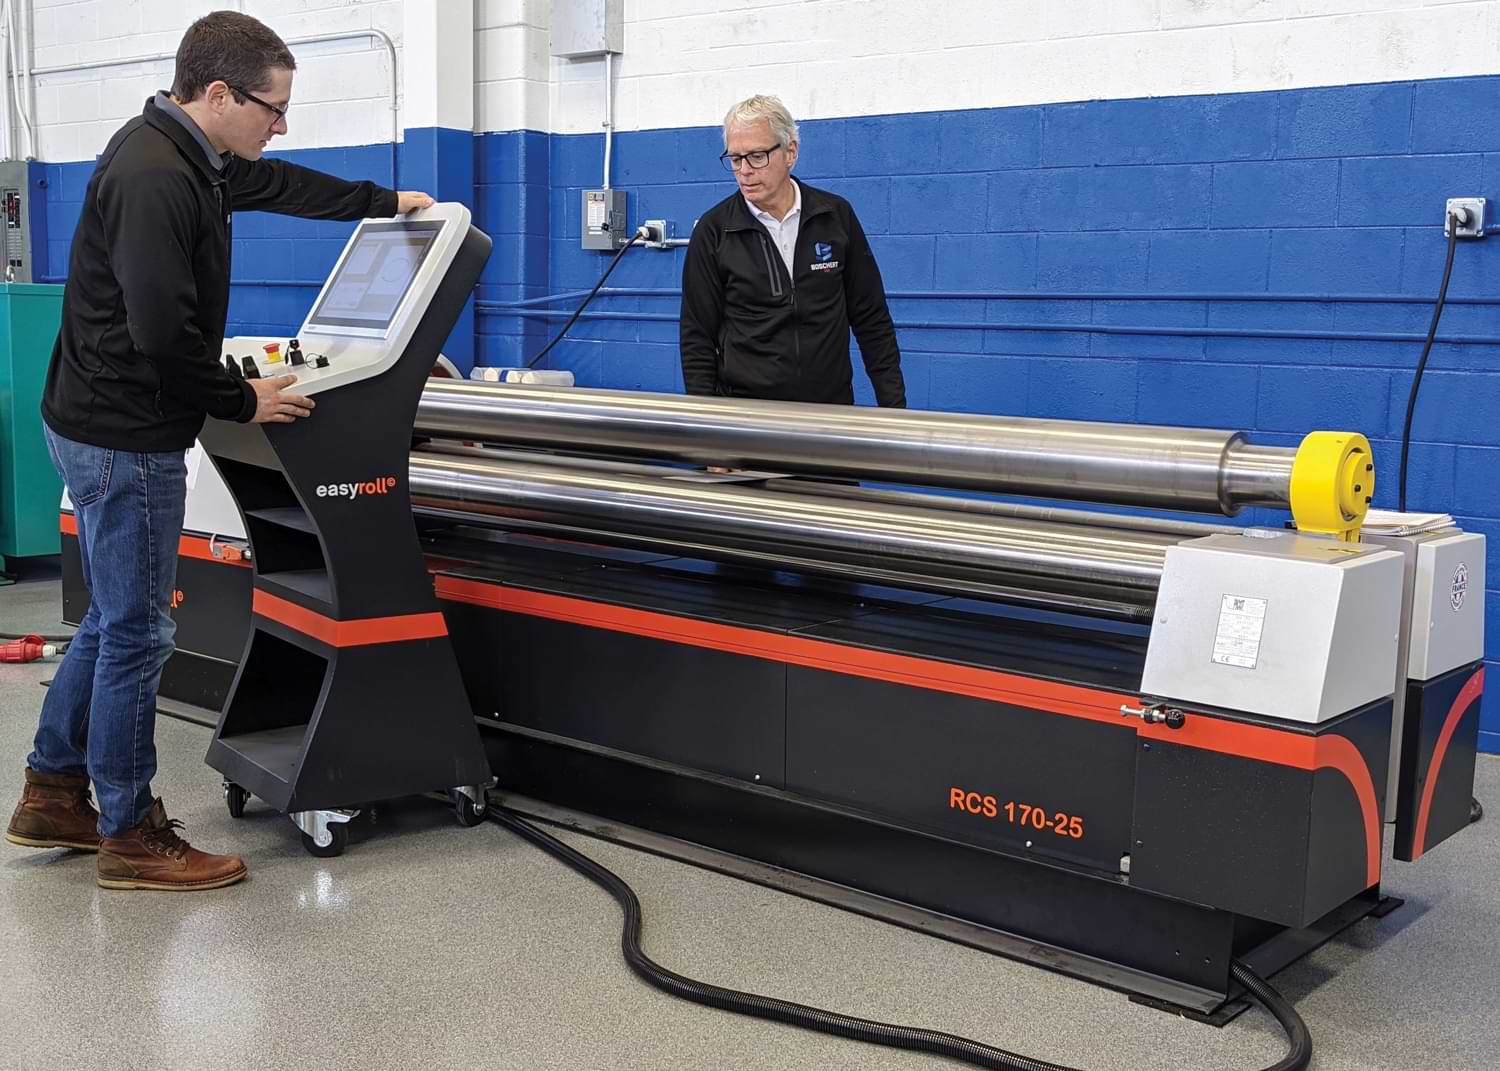 Boschert Precision Machinery Sales Director Tim Hoesly and President Greg Hoesly program the Picot 3-roll bending machine with the EasyRoll CNC control